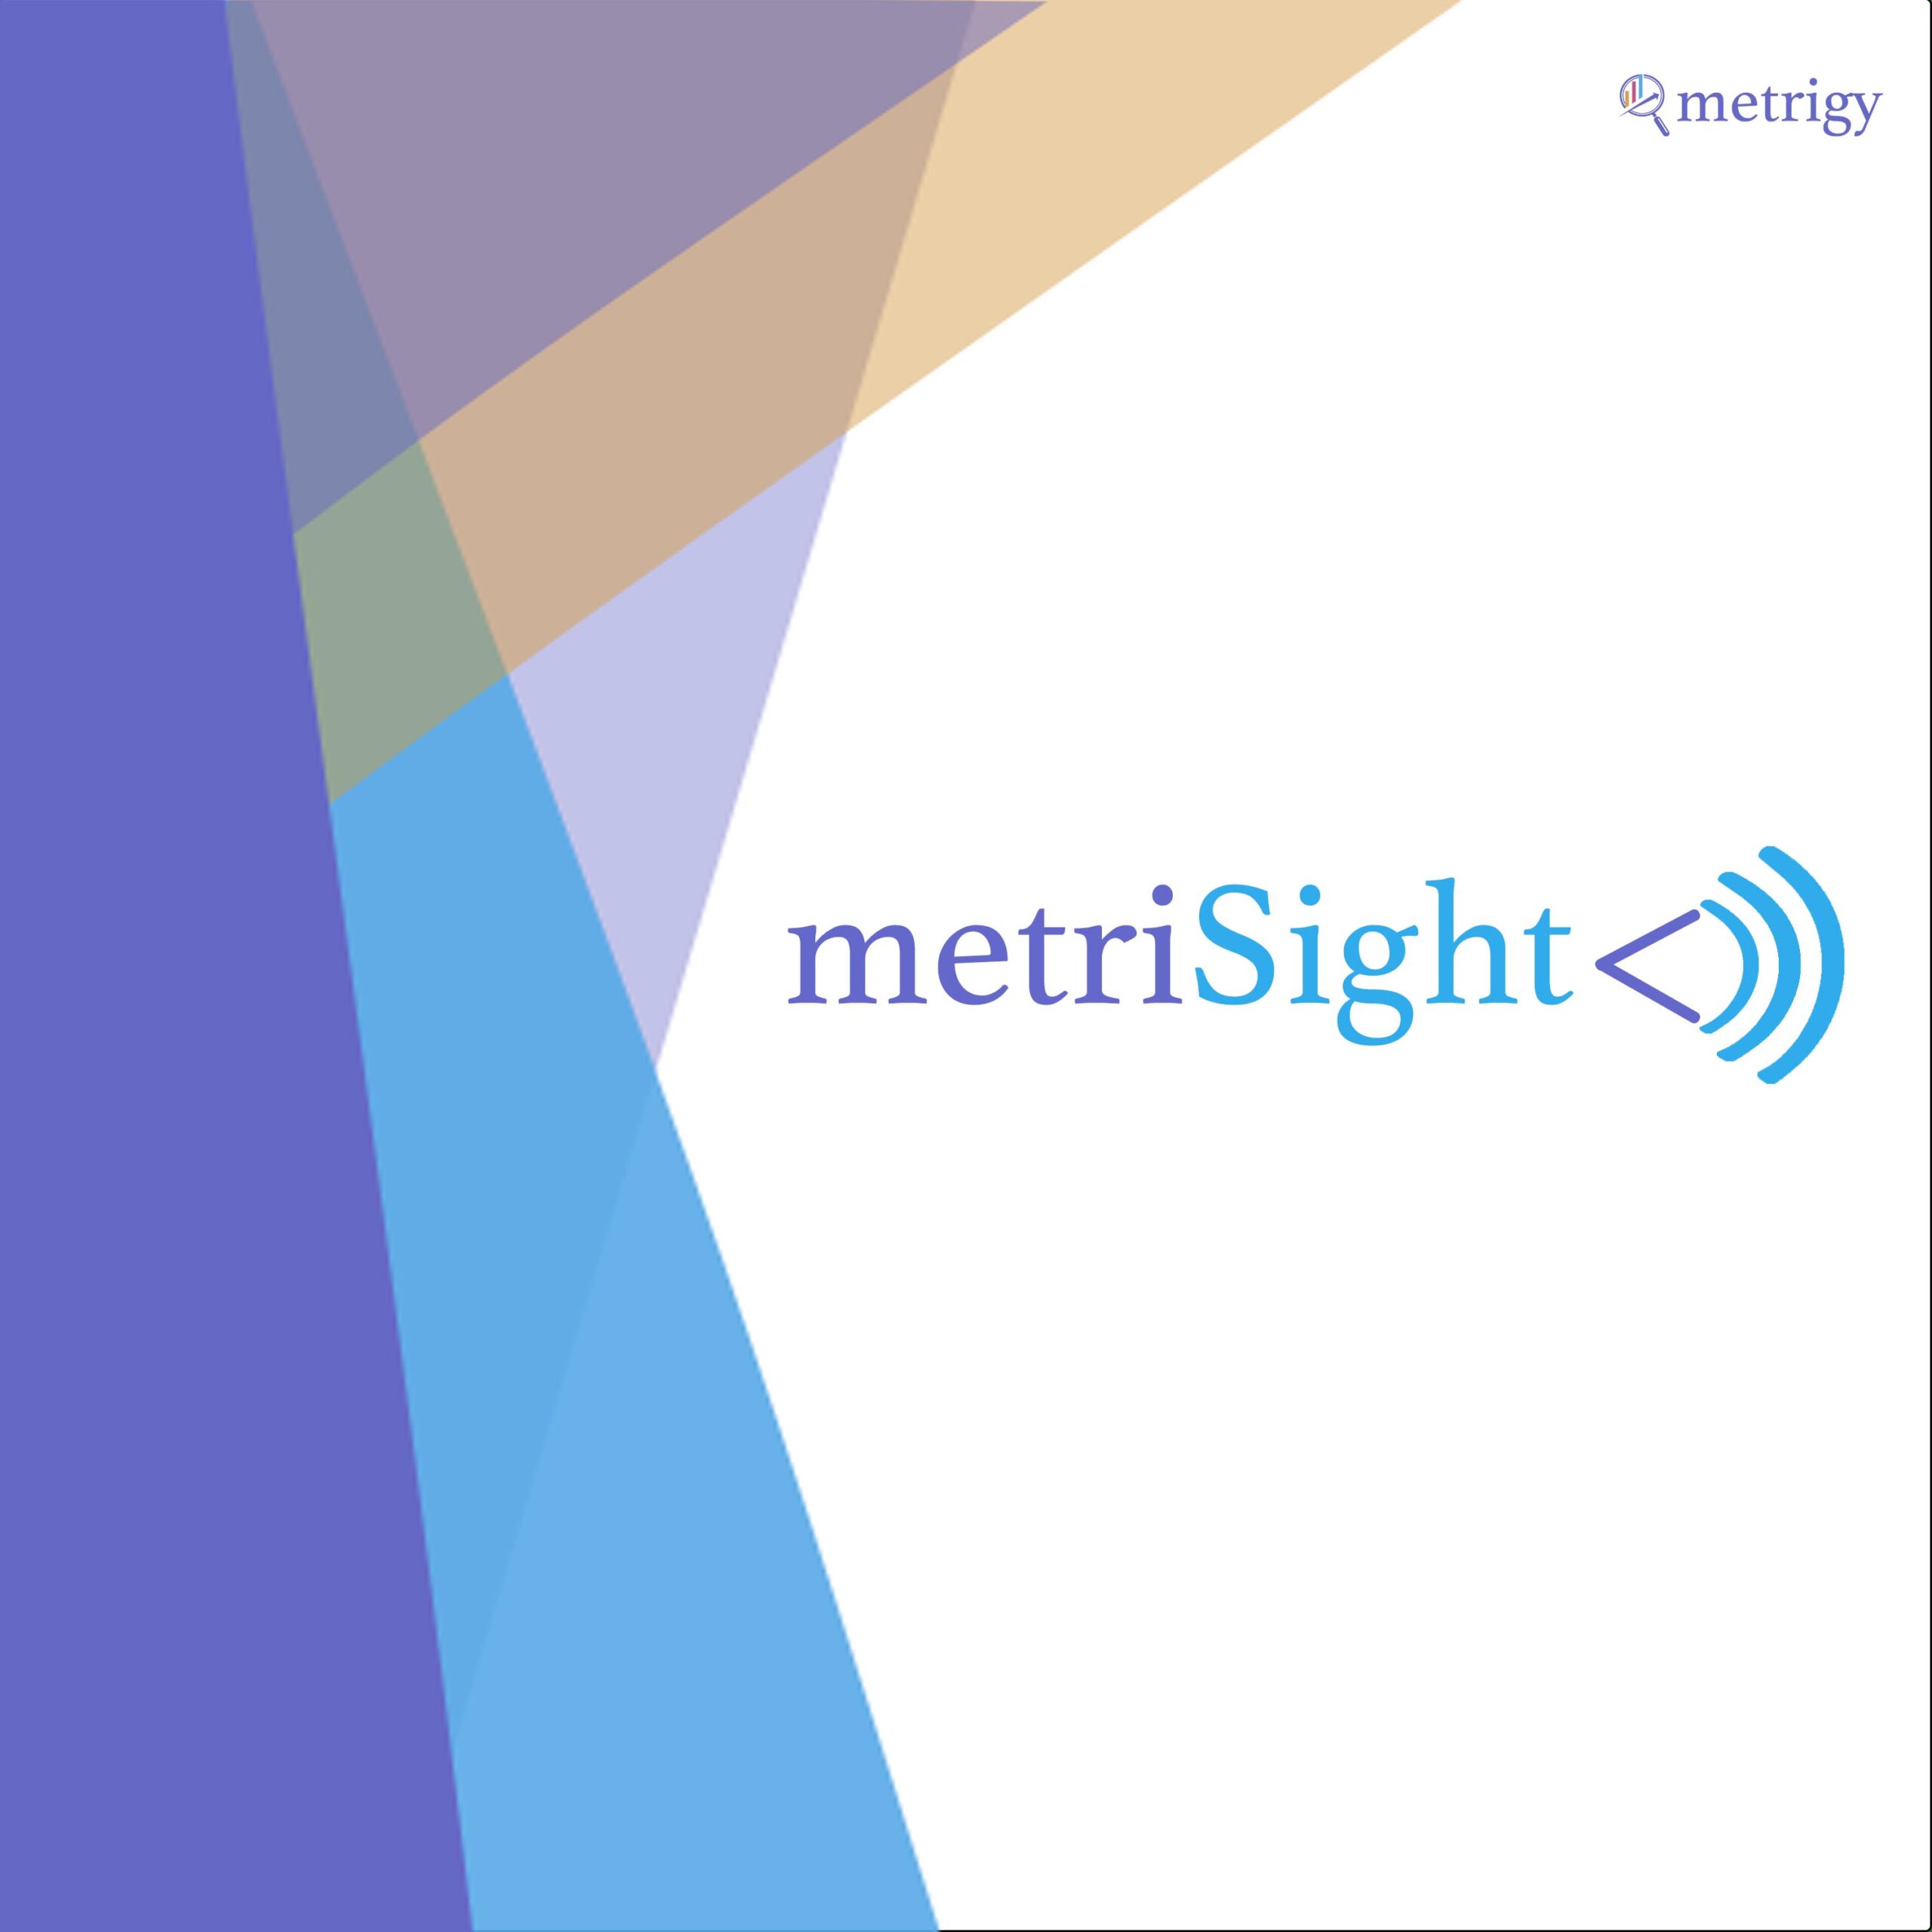 MetriSight Ep.59 - What's on Our UC Agenda for Enterprise Connect?